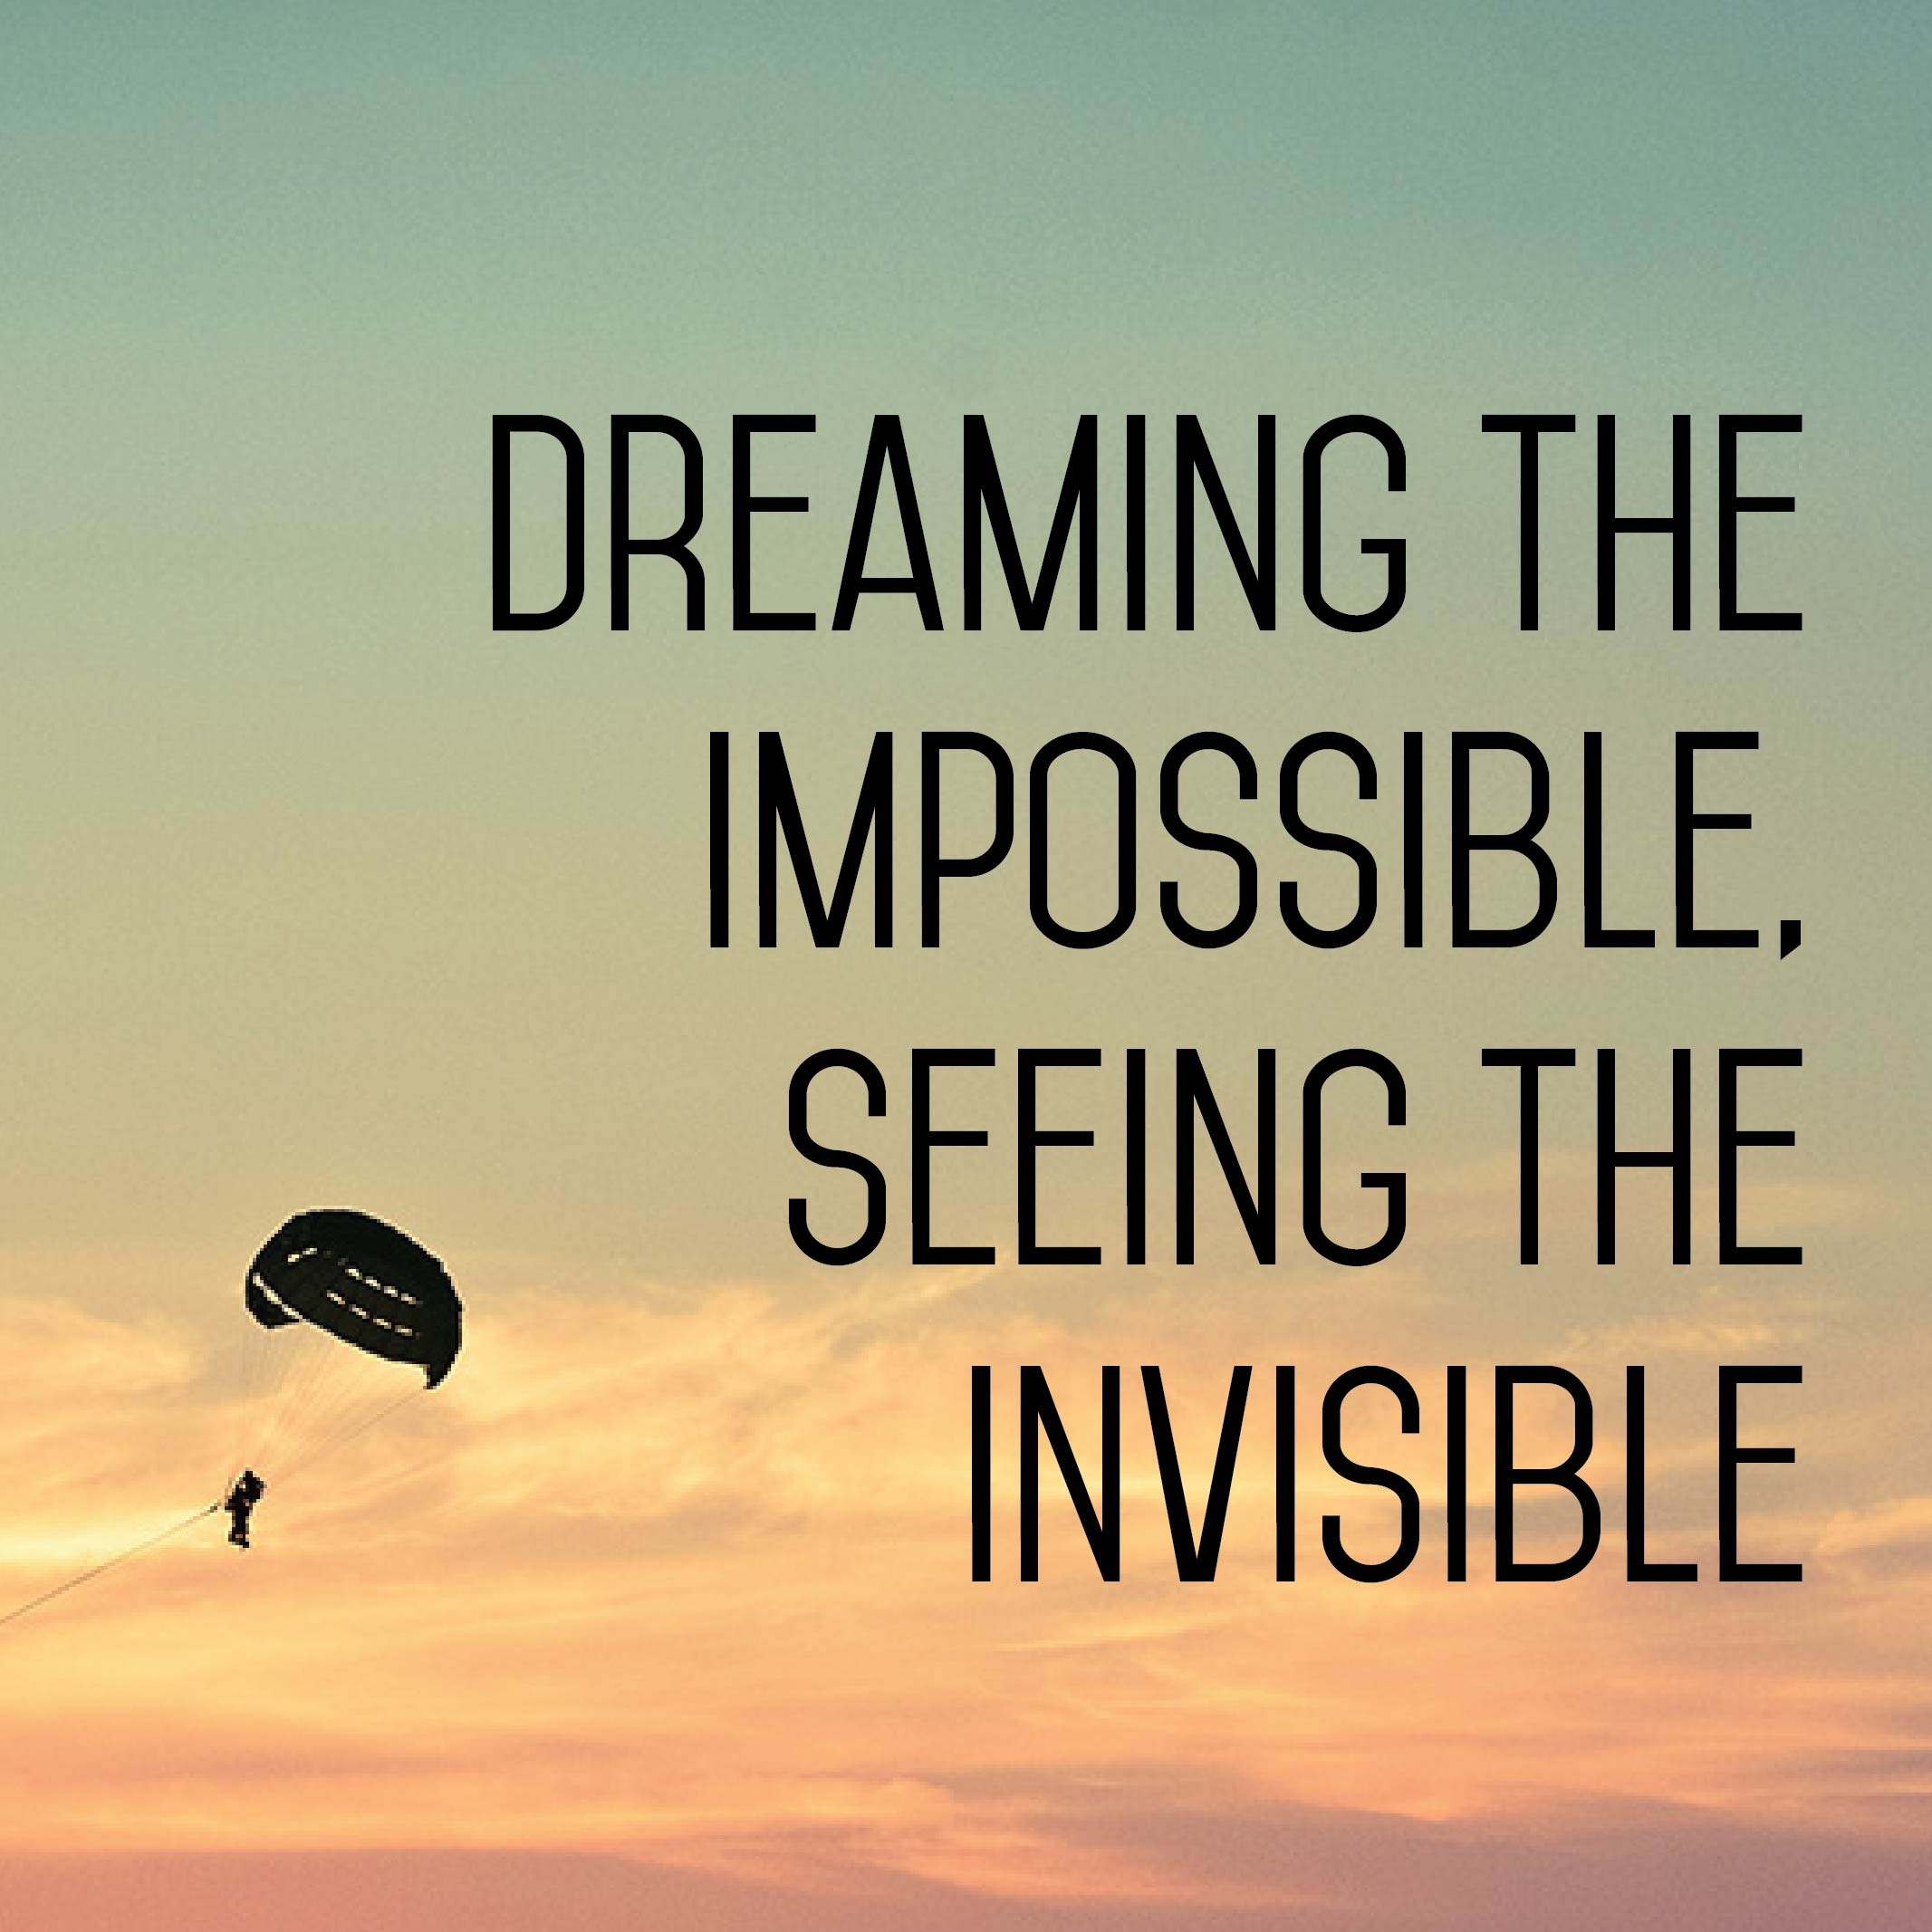 Dreaming the Impossible, Seeing the Invisible